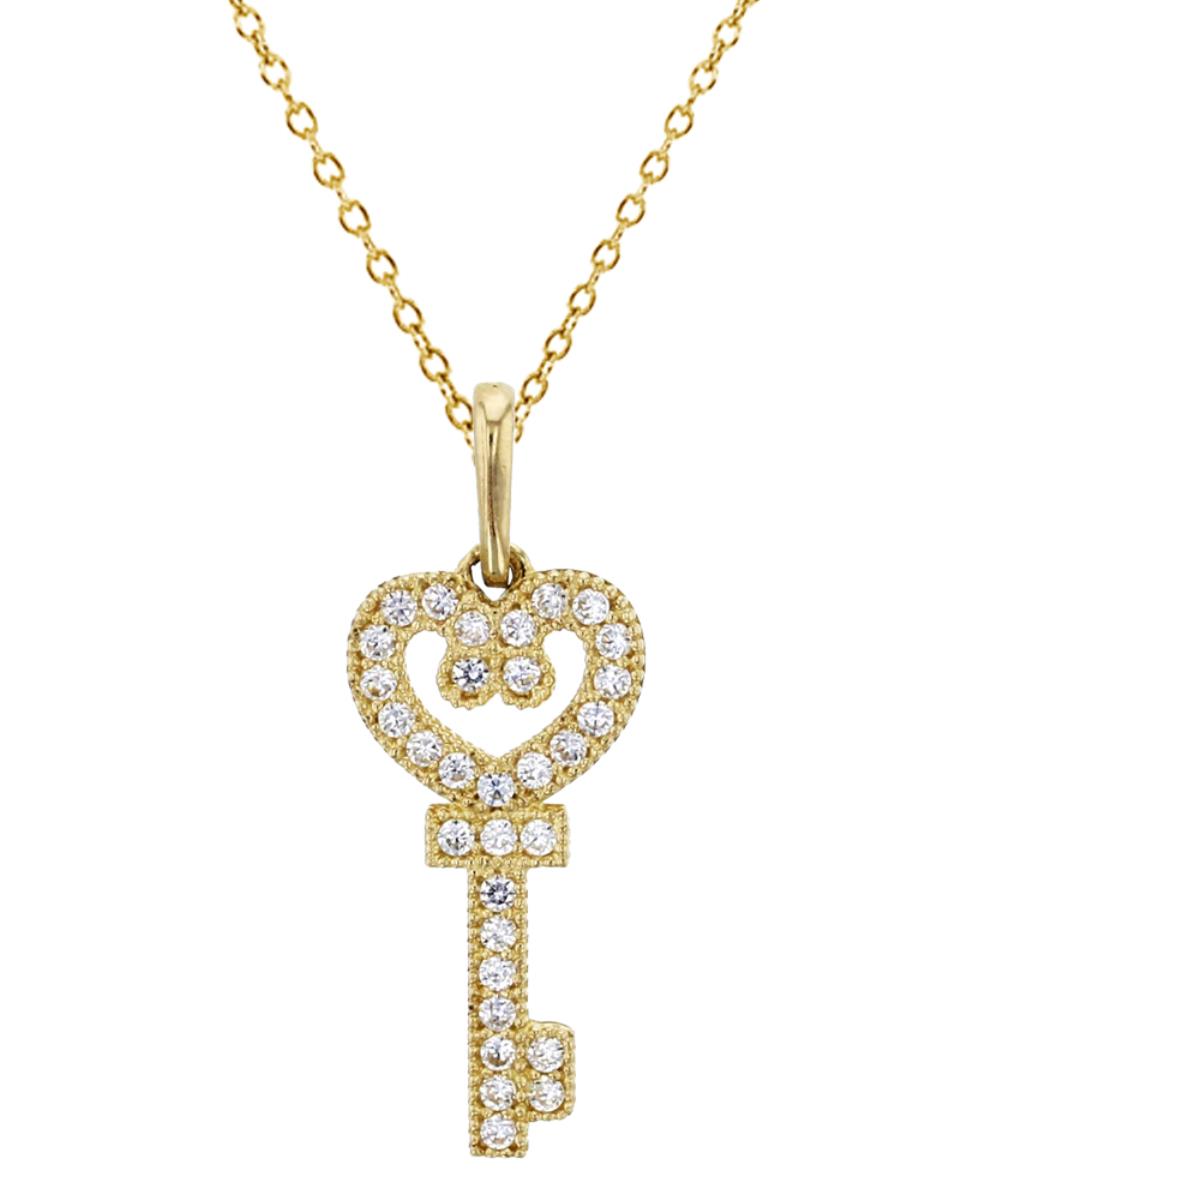 10K Yellow Gold Micropave Milgrain Heart Key 18" Necklace